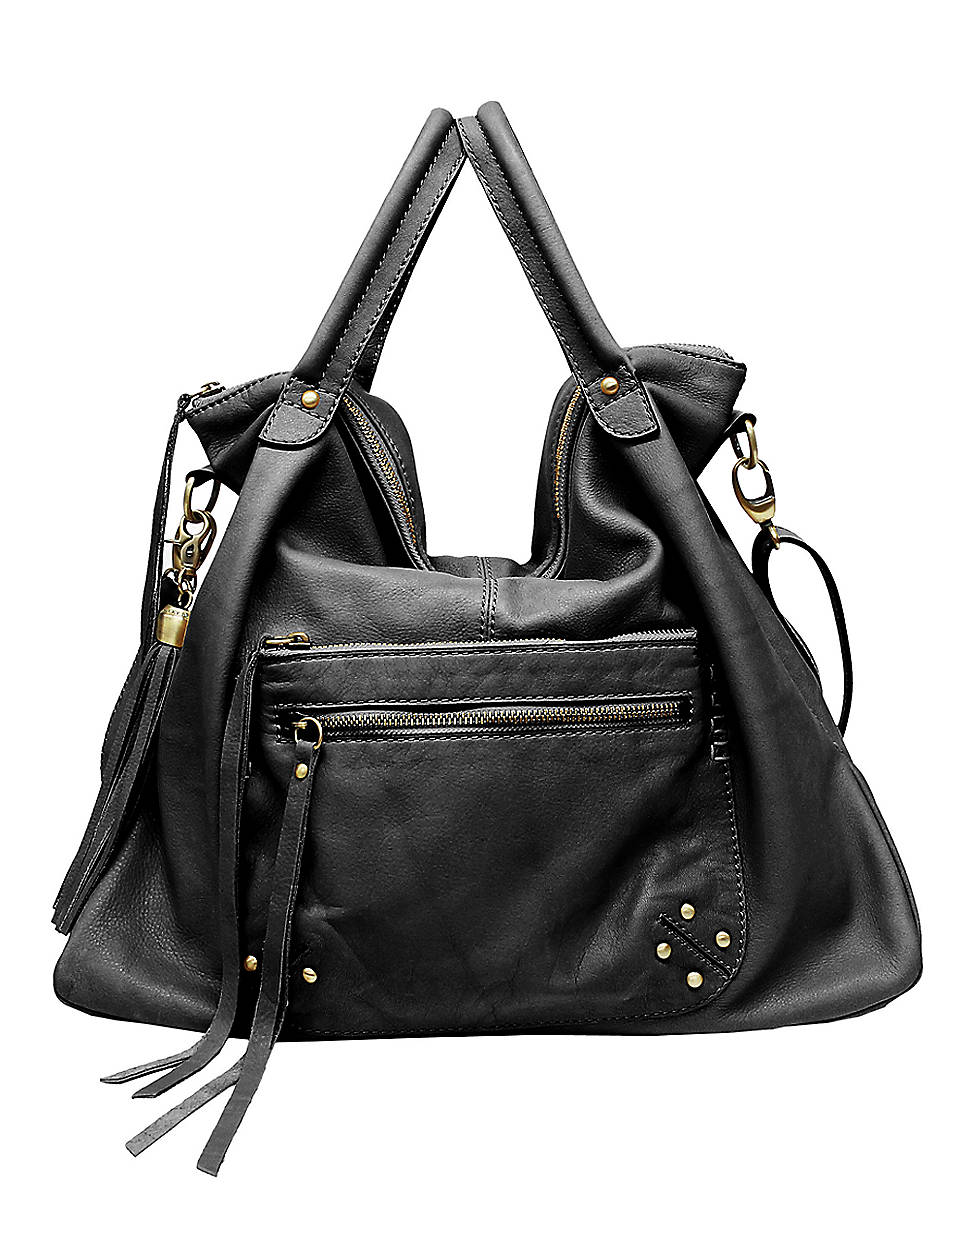 Lyst - Lucky Brand Del Ray Leather Tote Bag in Black